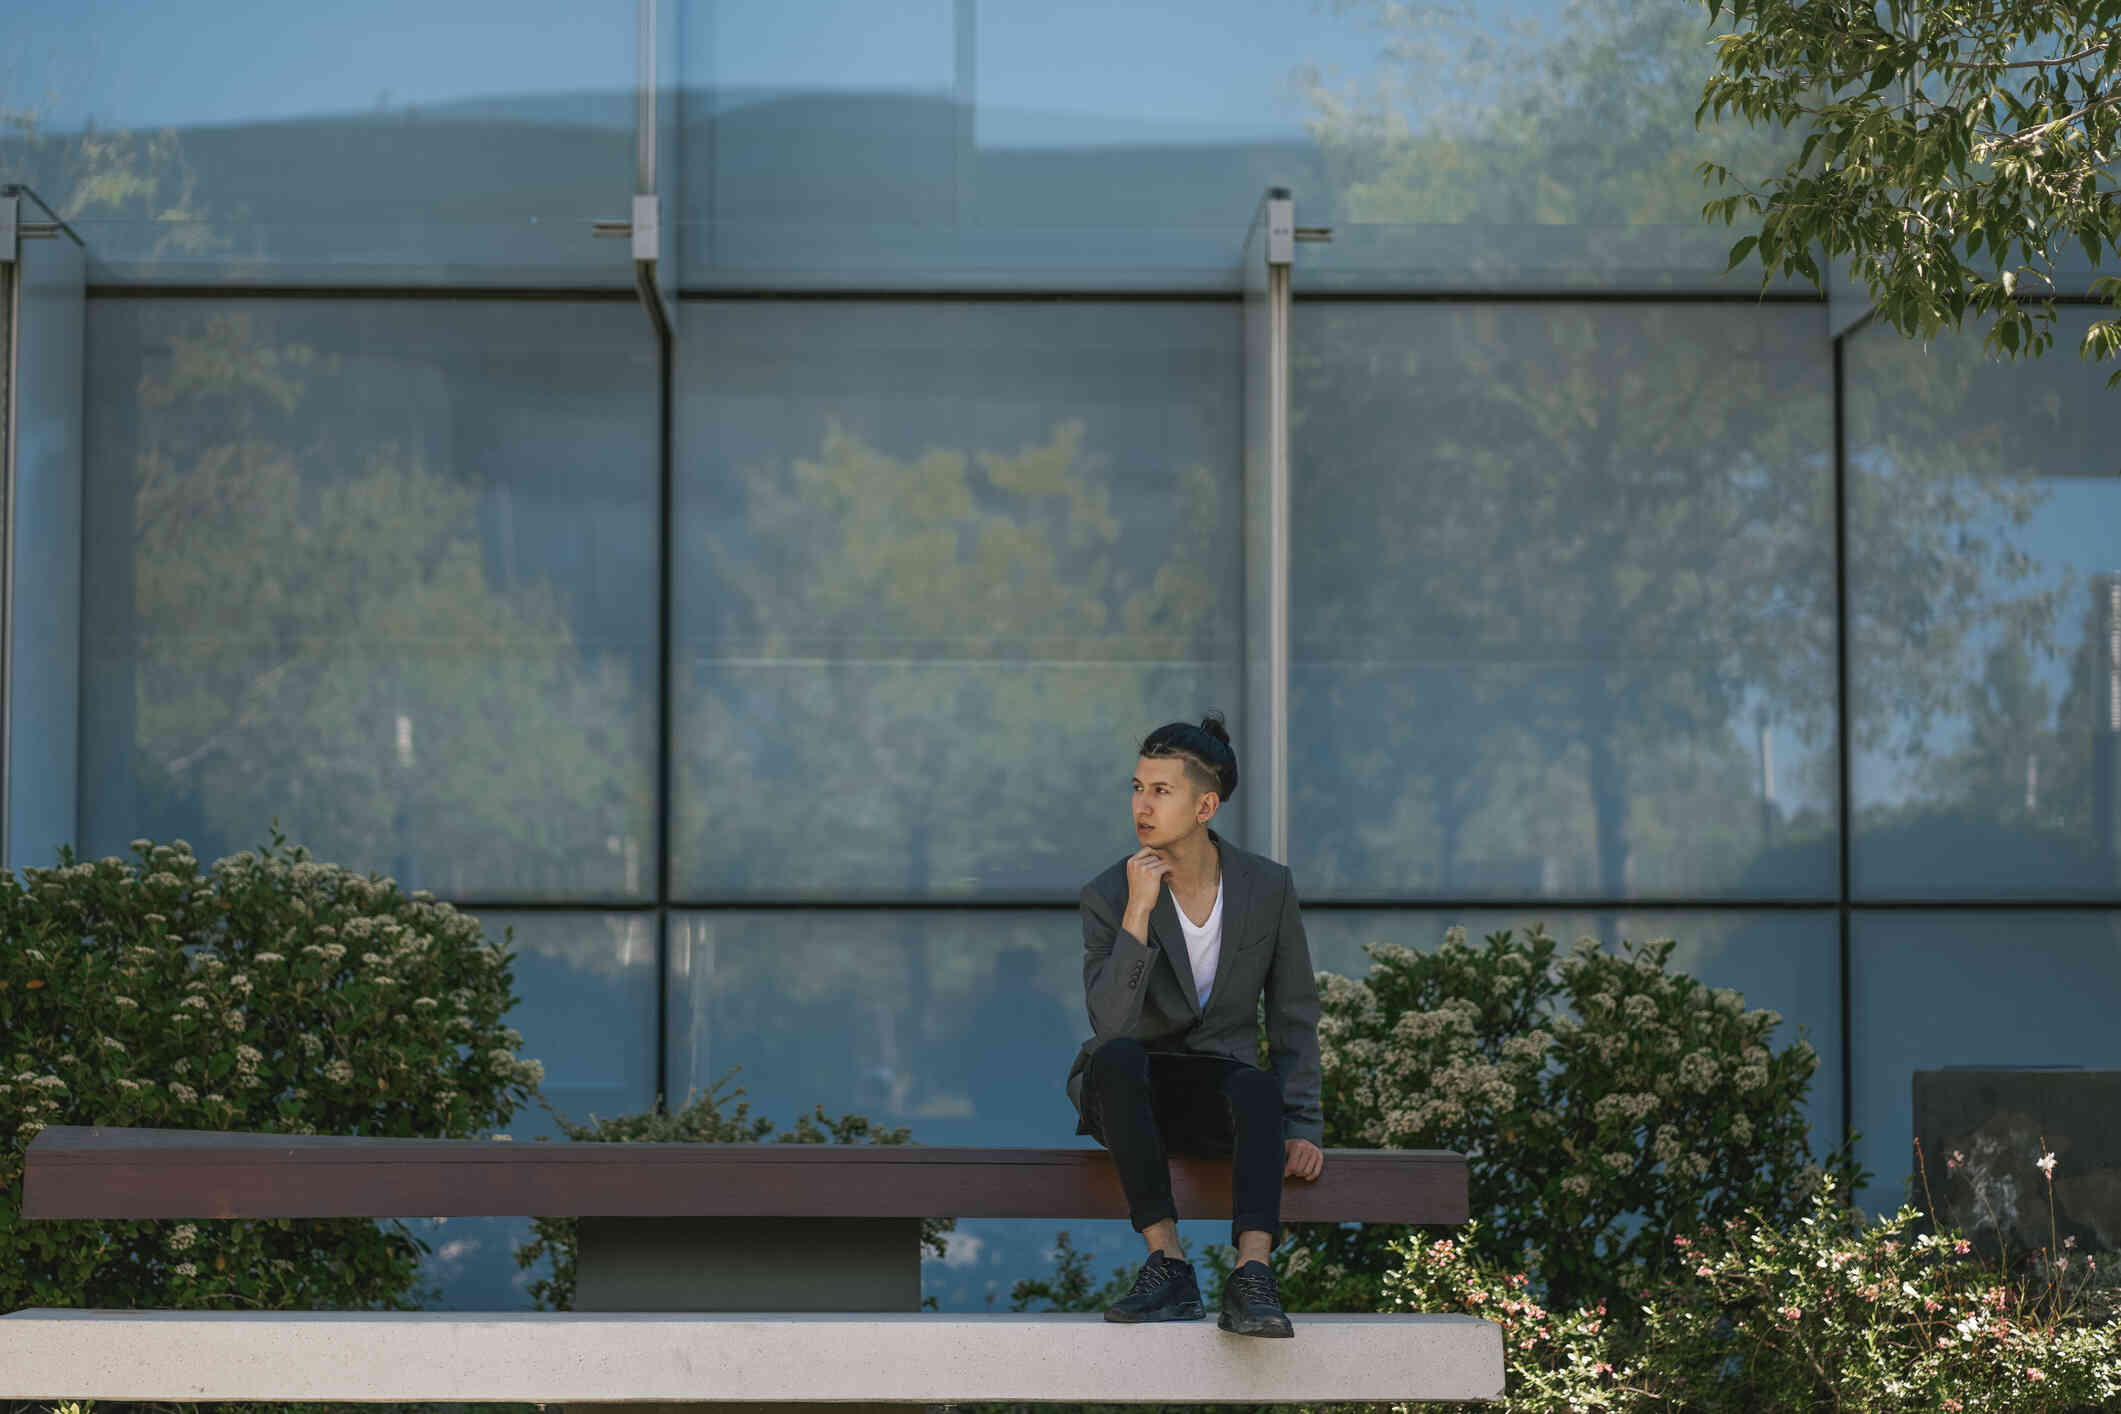 A man in a blazer sits alone on a bench ouside of a glass building and gazes off.